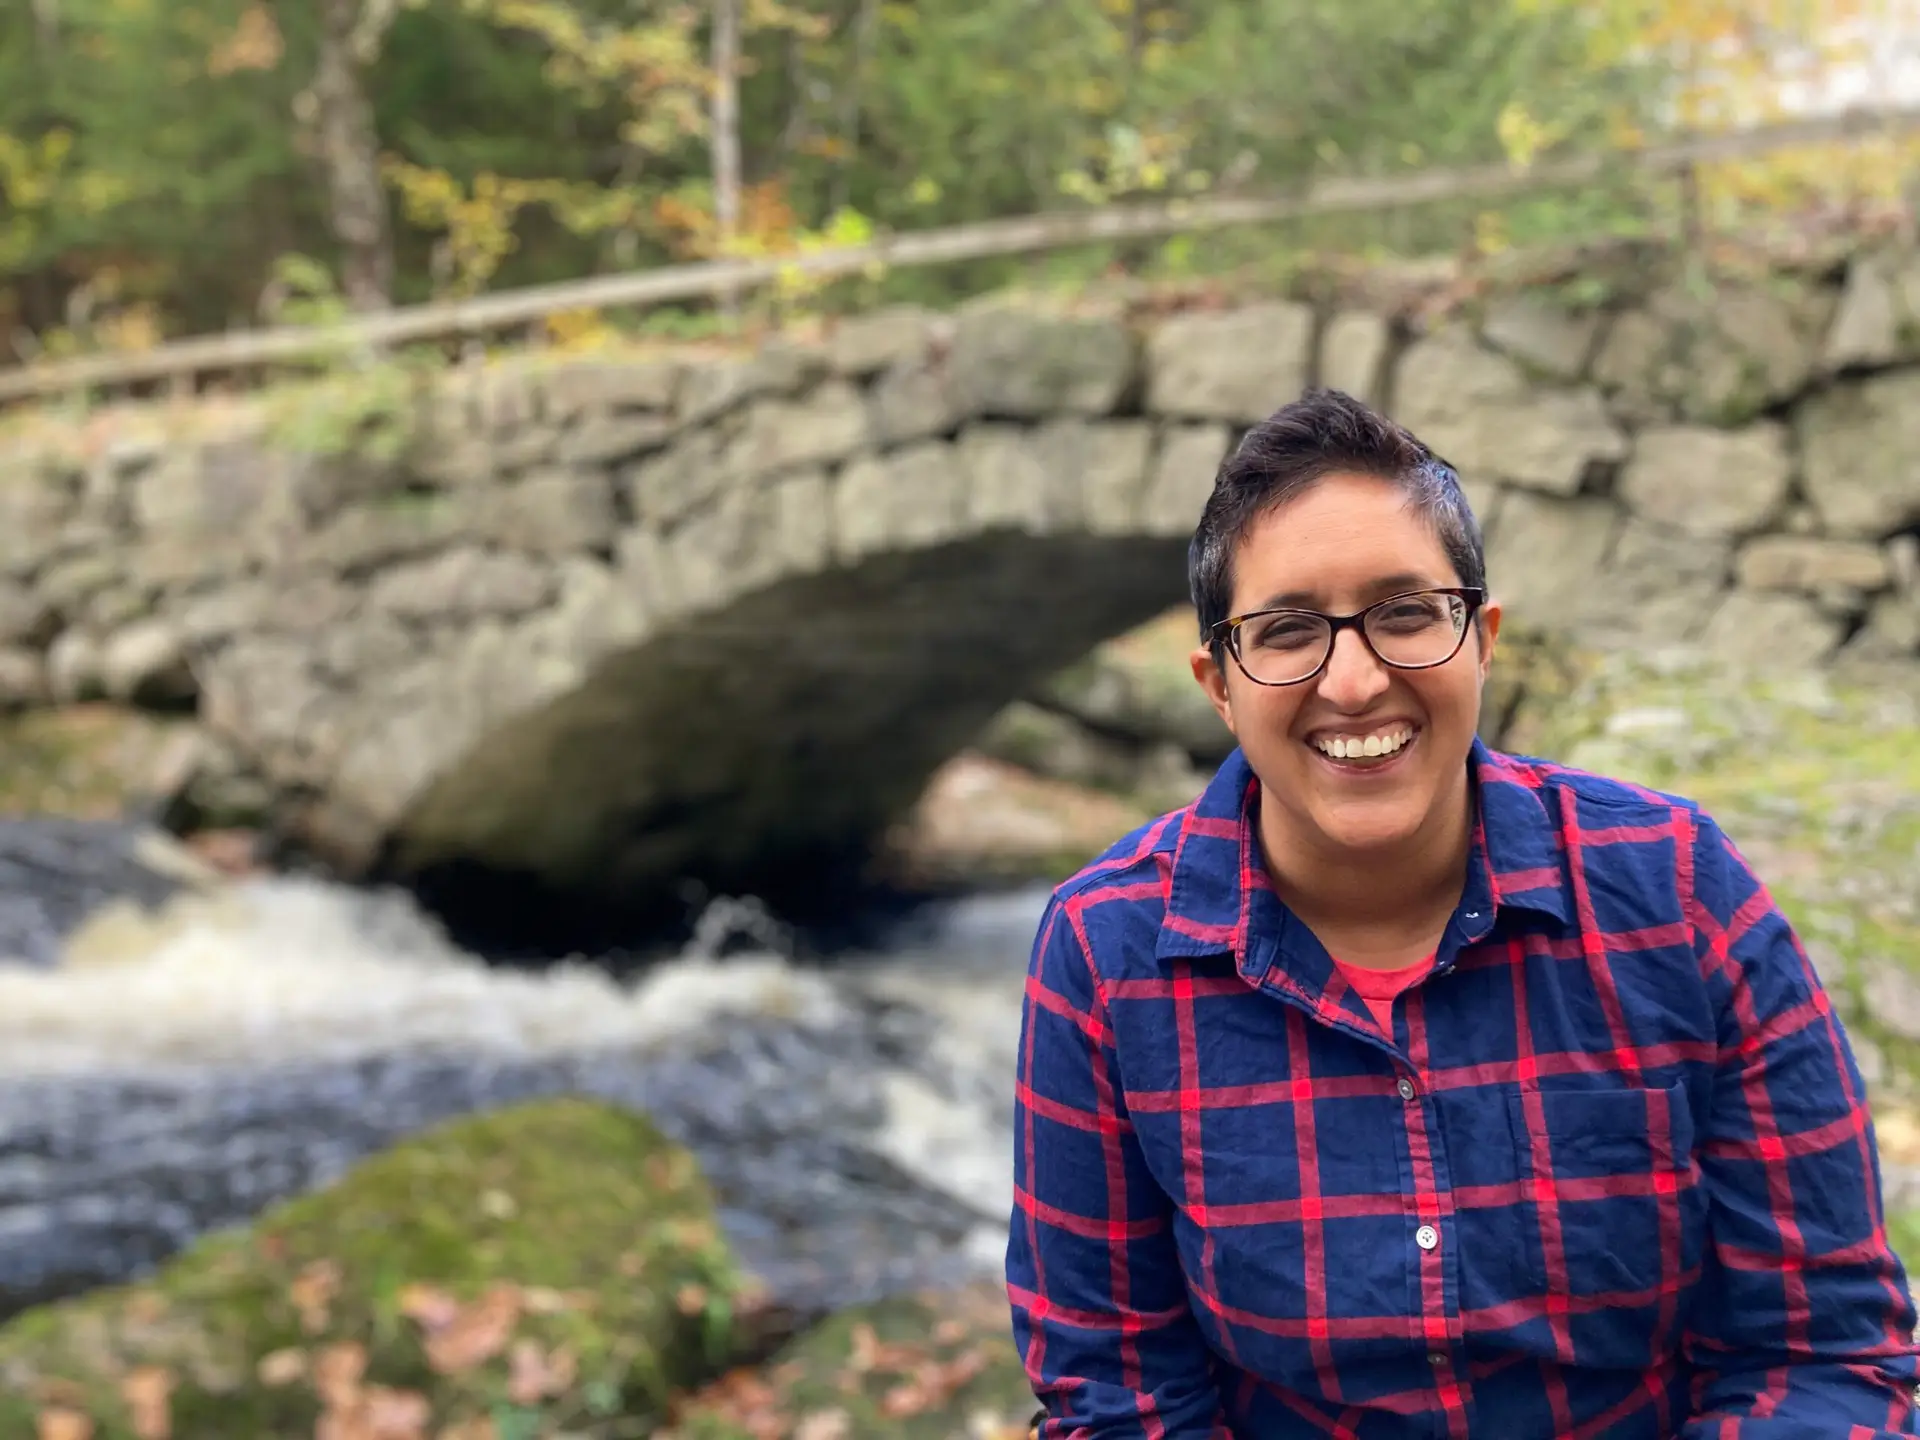 Author Neema Avashia is pictured sitting in front of a wooded area with a stone bridge.